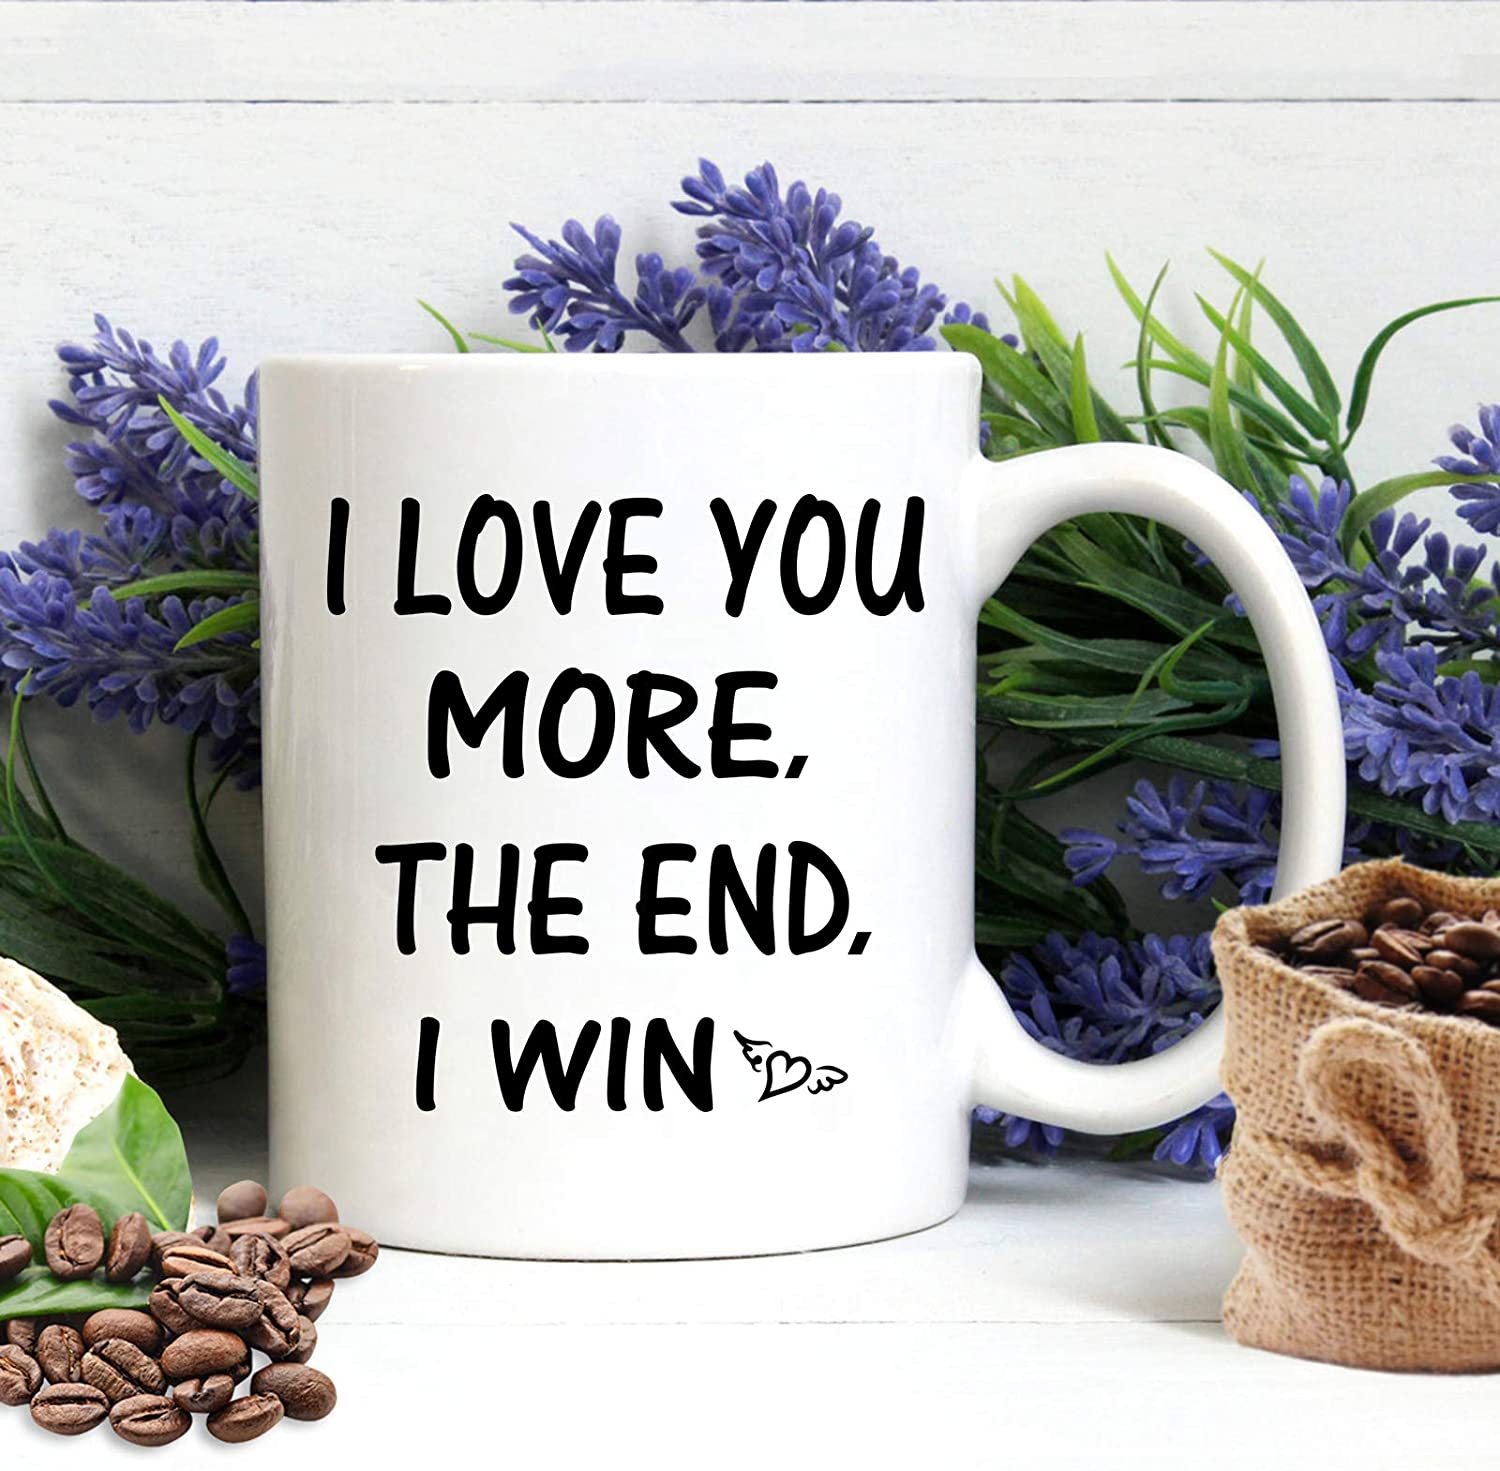 Funny Coffee Mug I Love You More the End I Win Mug Presents for Girlfriend Boyfriend Valentine s Day Wedding Anniversary for Her Him Women Men Couples